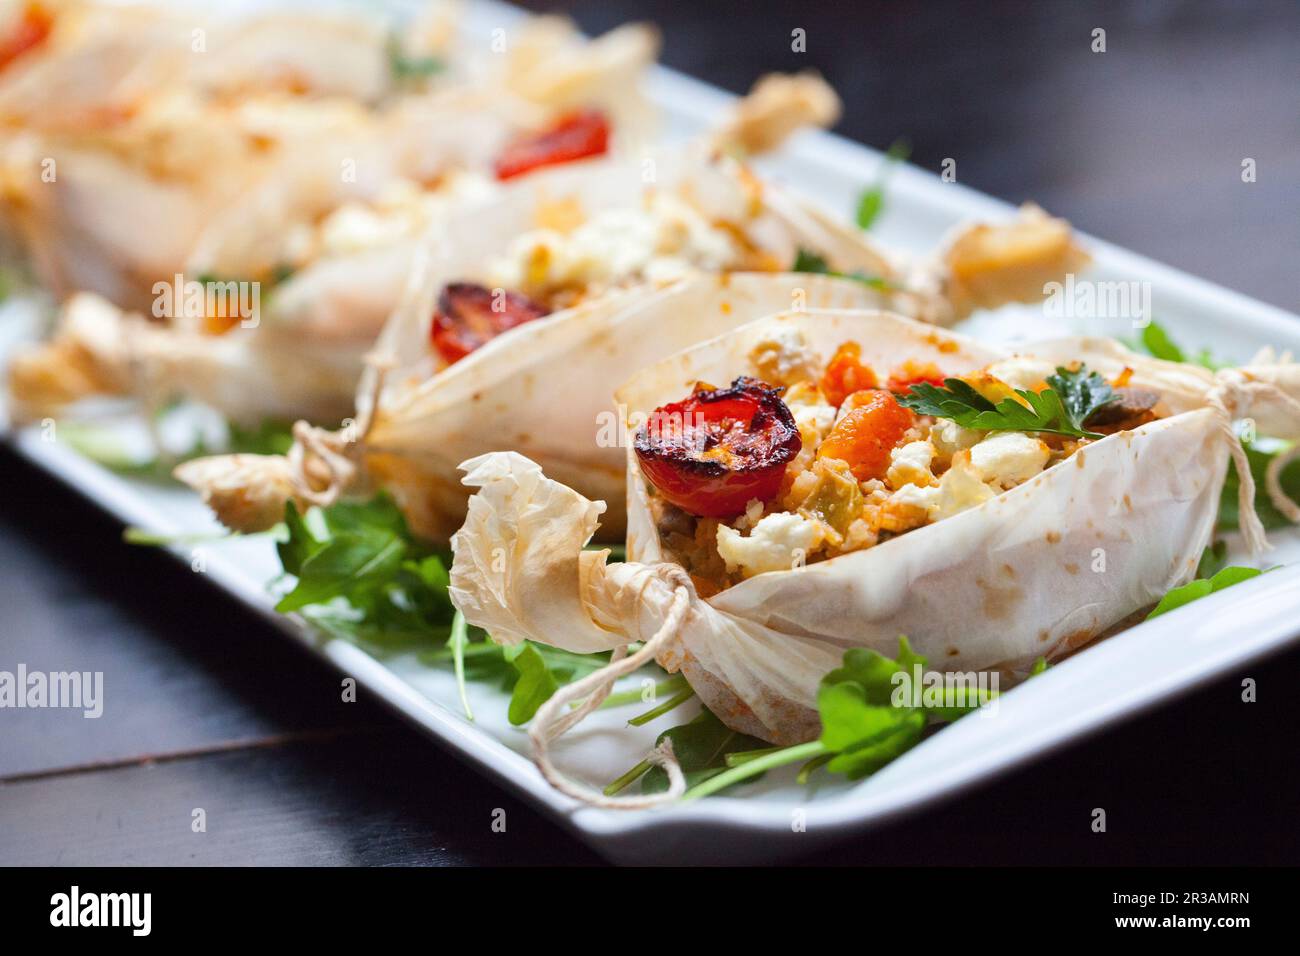 Pergament nests with tomatoes and cheese Stock Photo